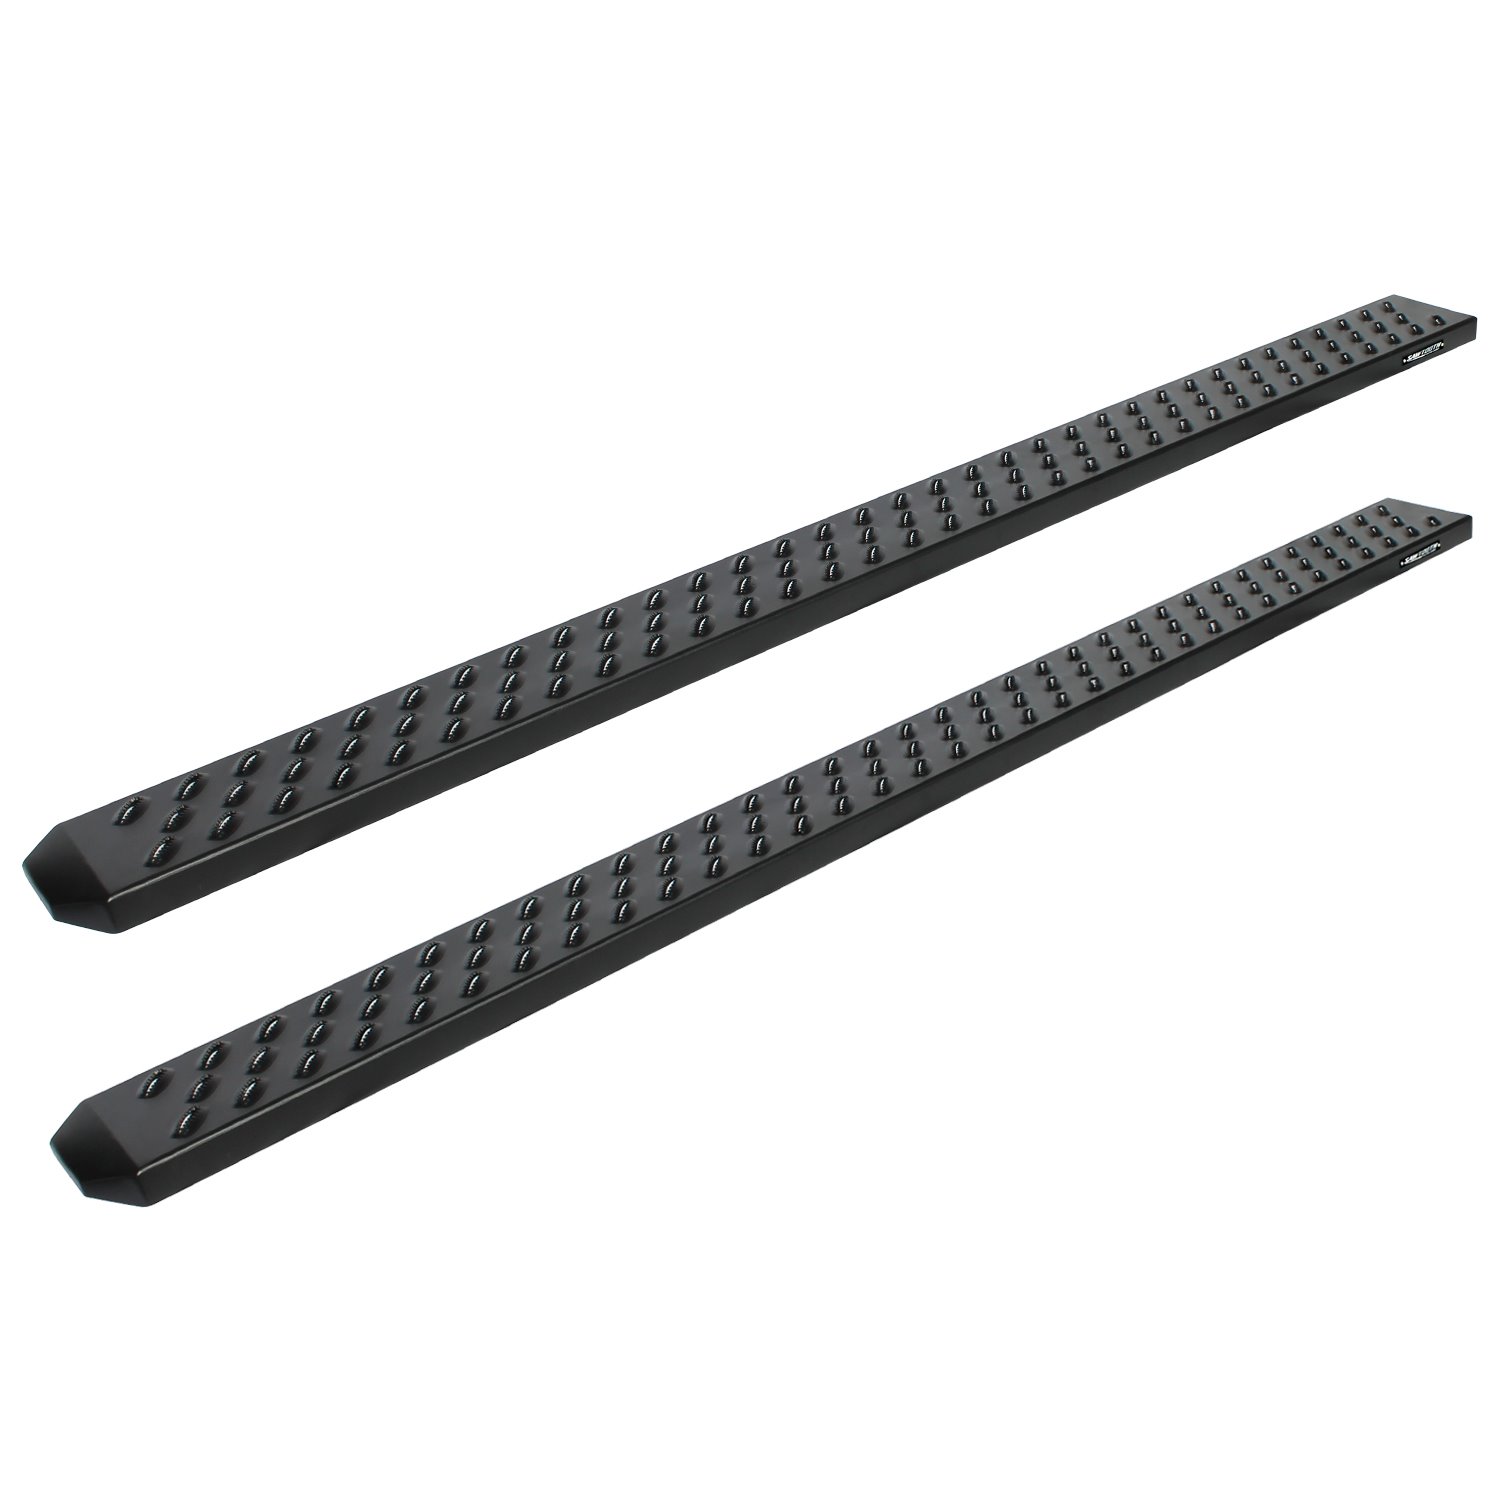 2103-0377BT Raptor Series 6.5 in Sawtooth Slide Track Running Boards, Black Textured Aluminum, Fits Select Ford Ranger Crew Cab